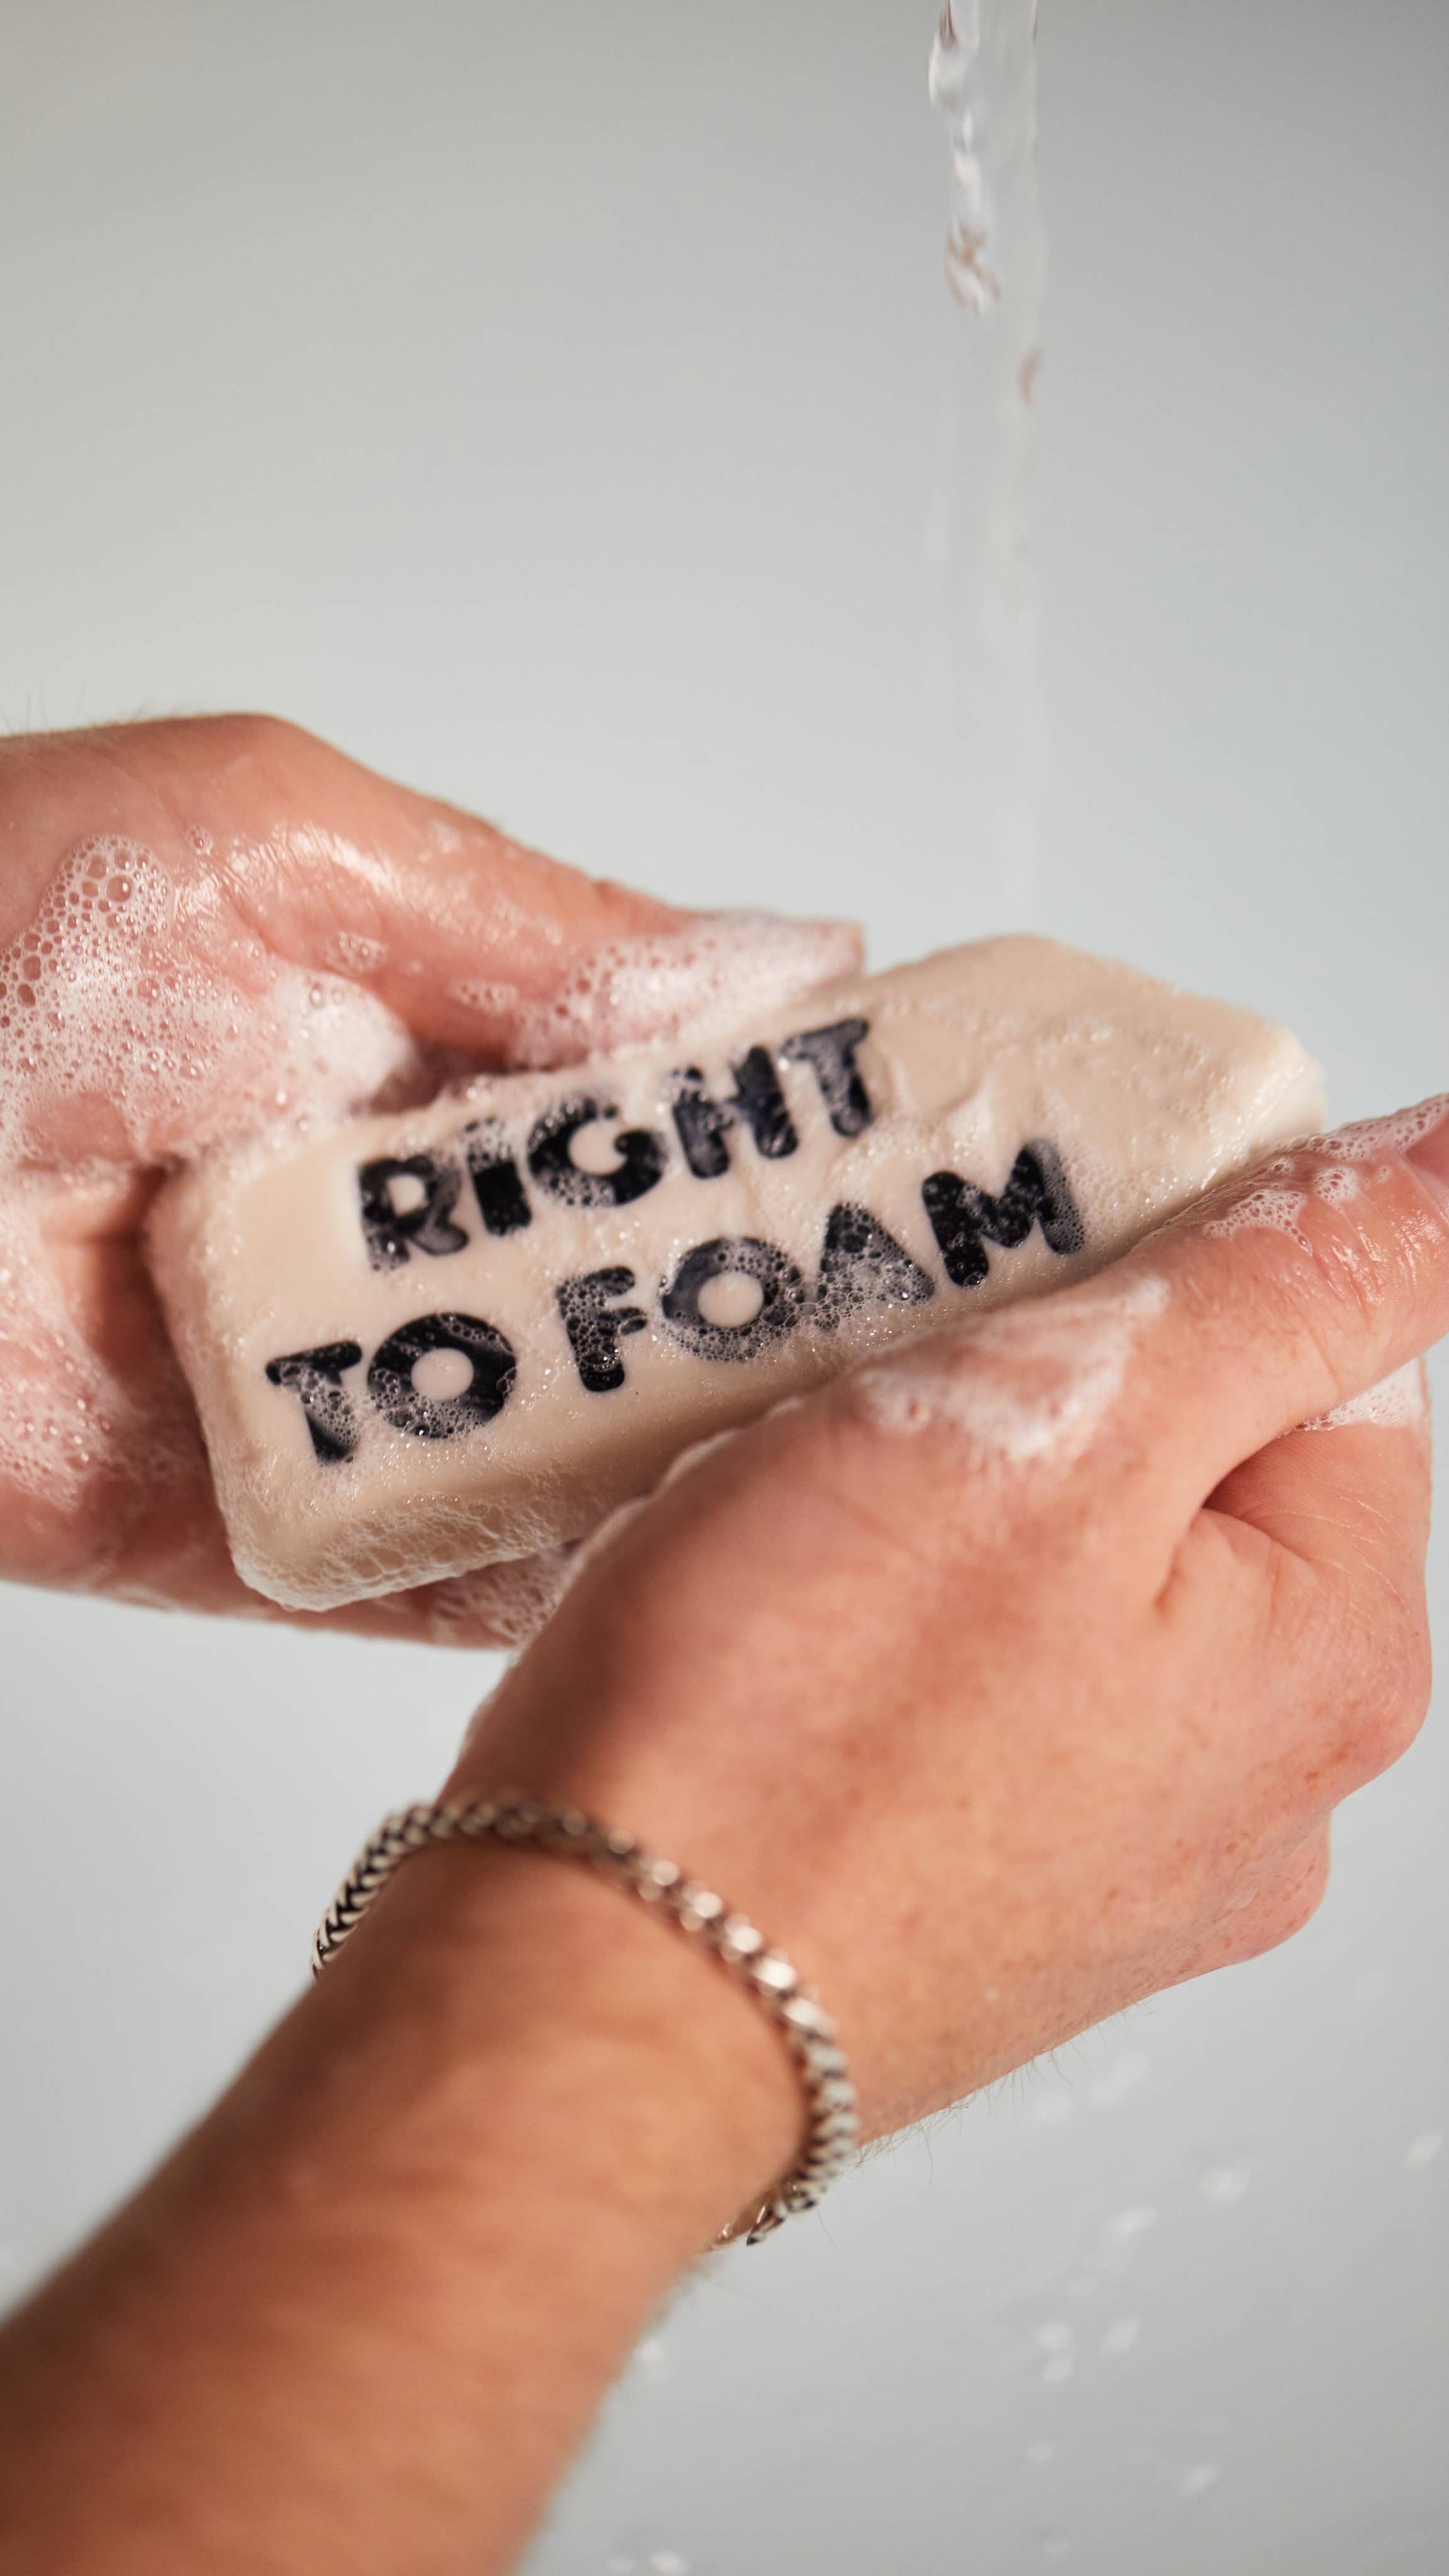 Image shows a close-up of the model's hands as they create a lather with the Right to Foam soap under running water.